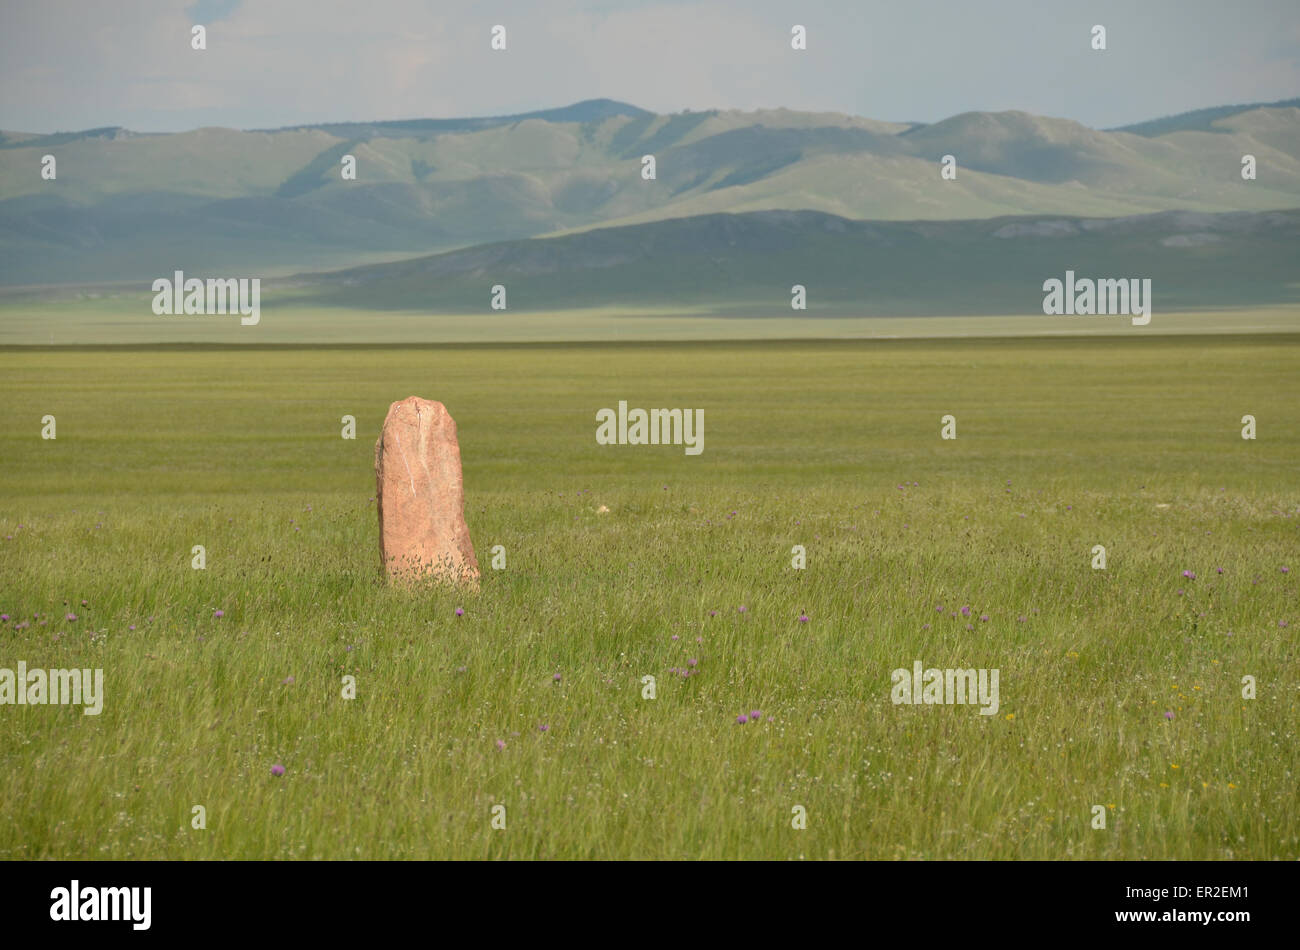 A deer stone in the steppe, Ovsgol province, northern Mongolia. Stock Photo